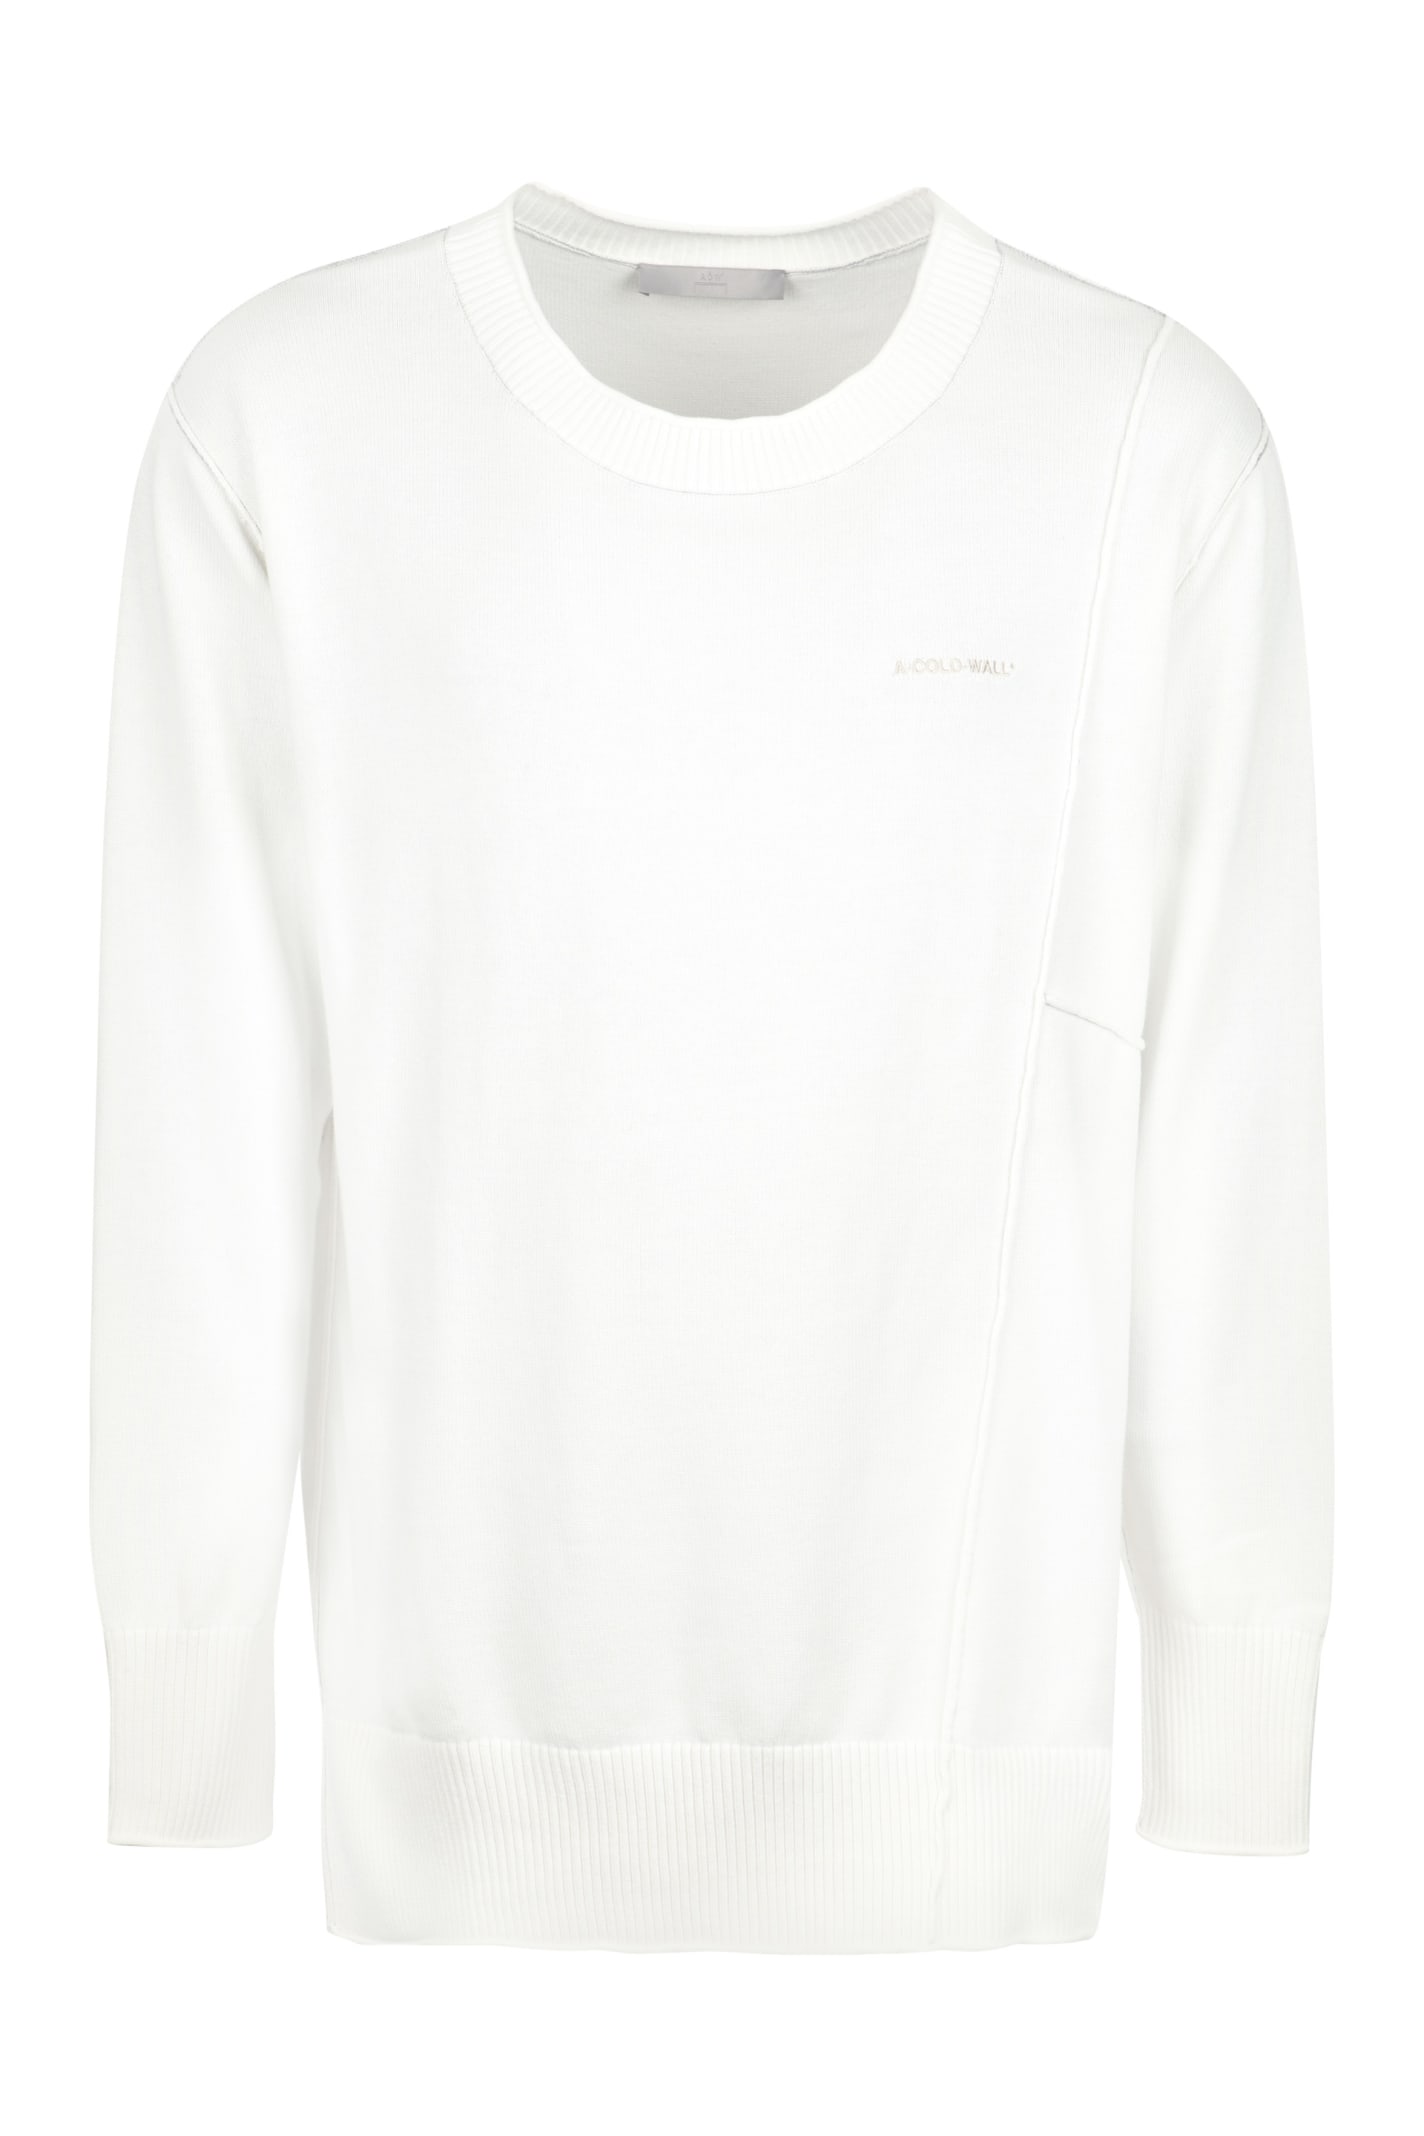 A-COLD-WALL Long Sleeve Crew-neck Sweater